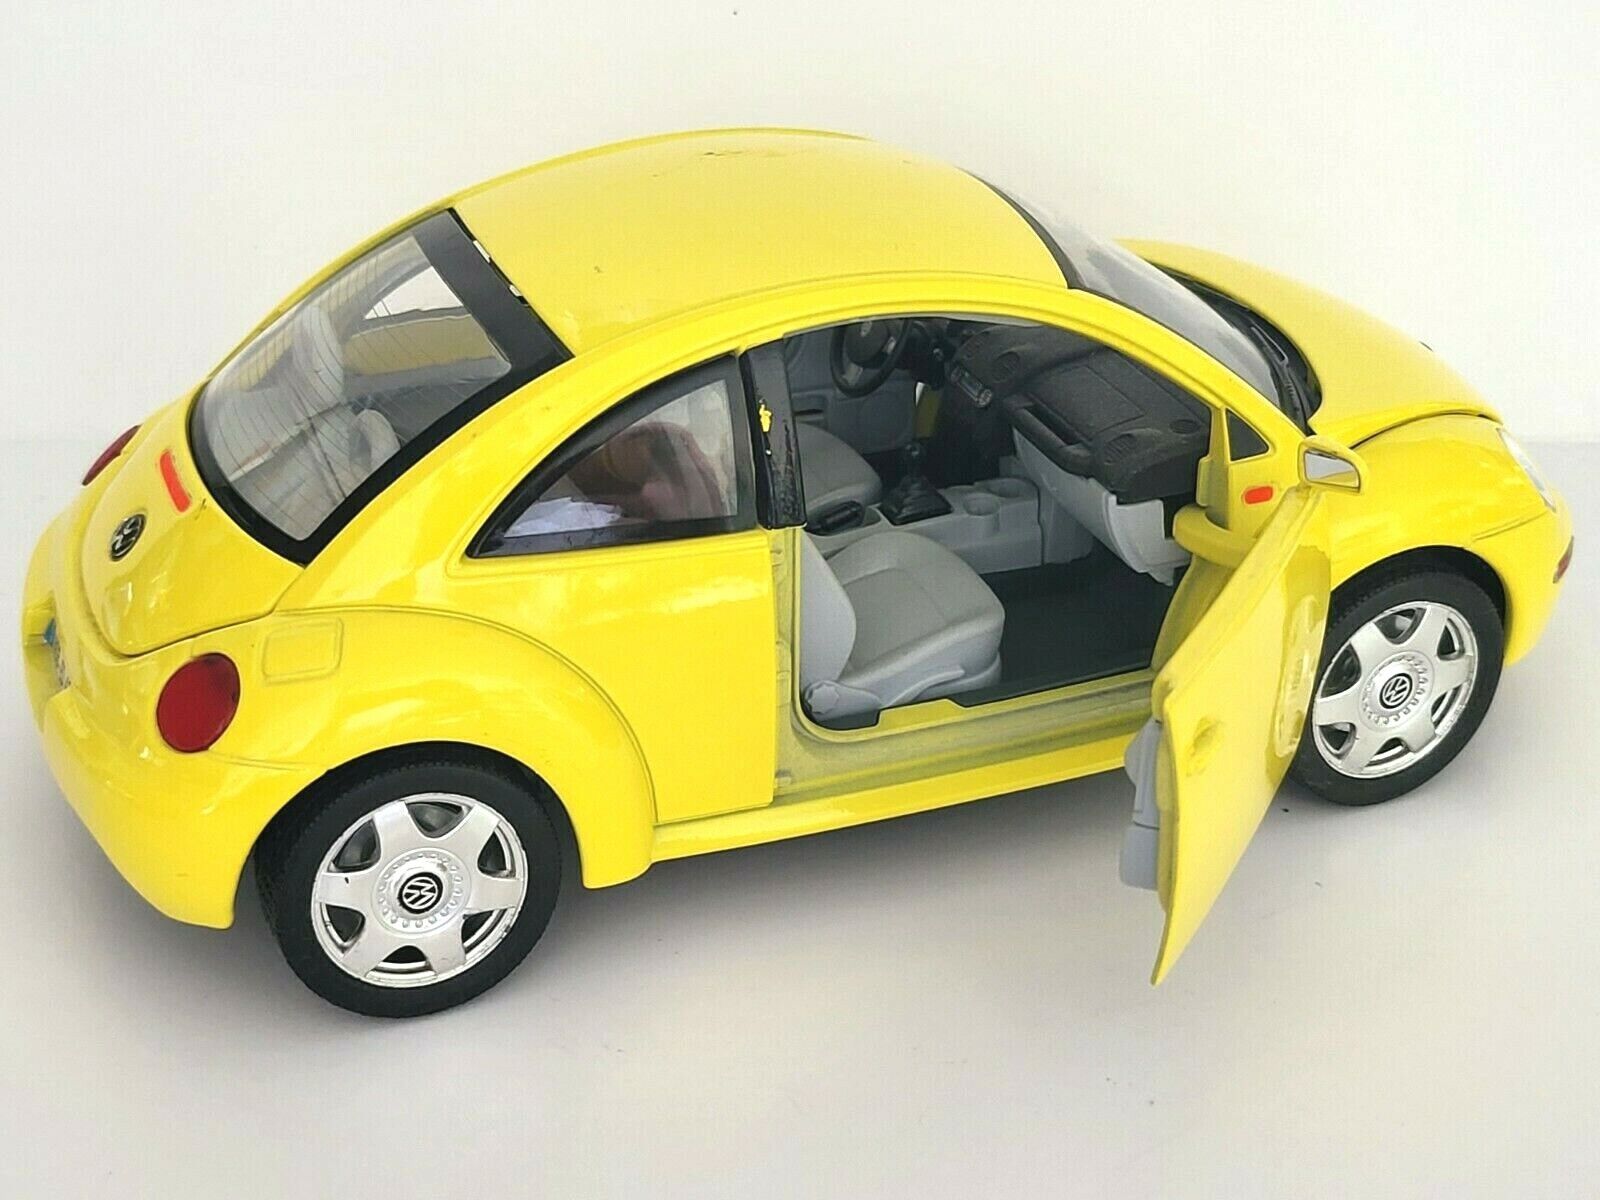 1:18 YELLOW 1998 Volkswagen New Beetle diecast gold collection made in Italy